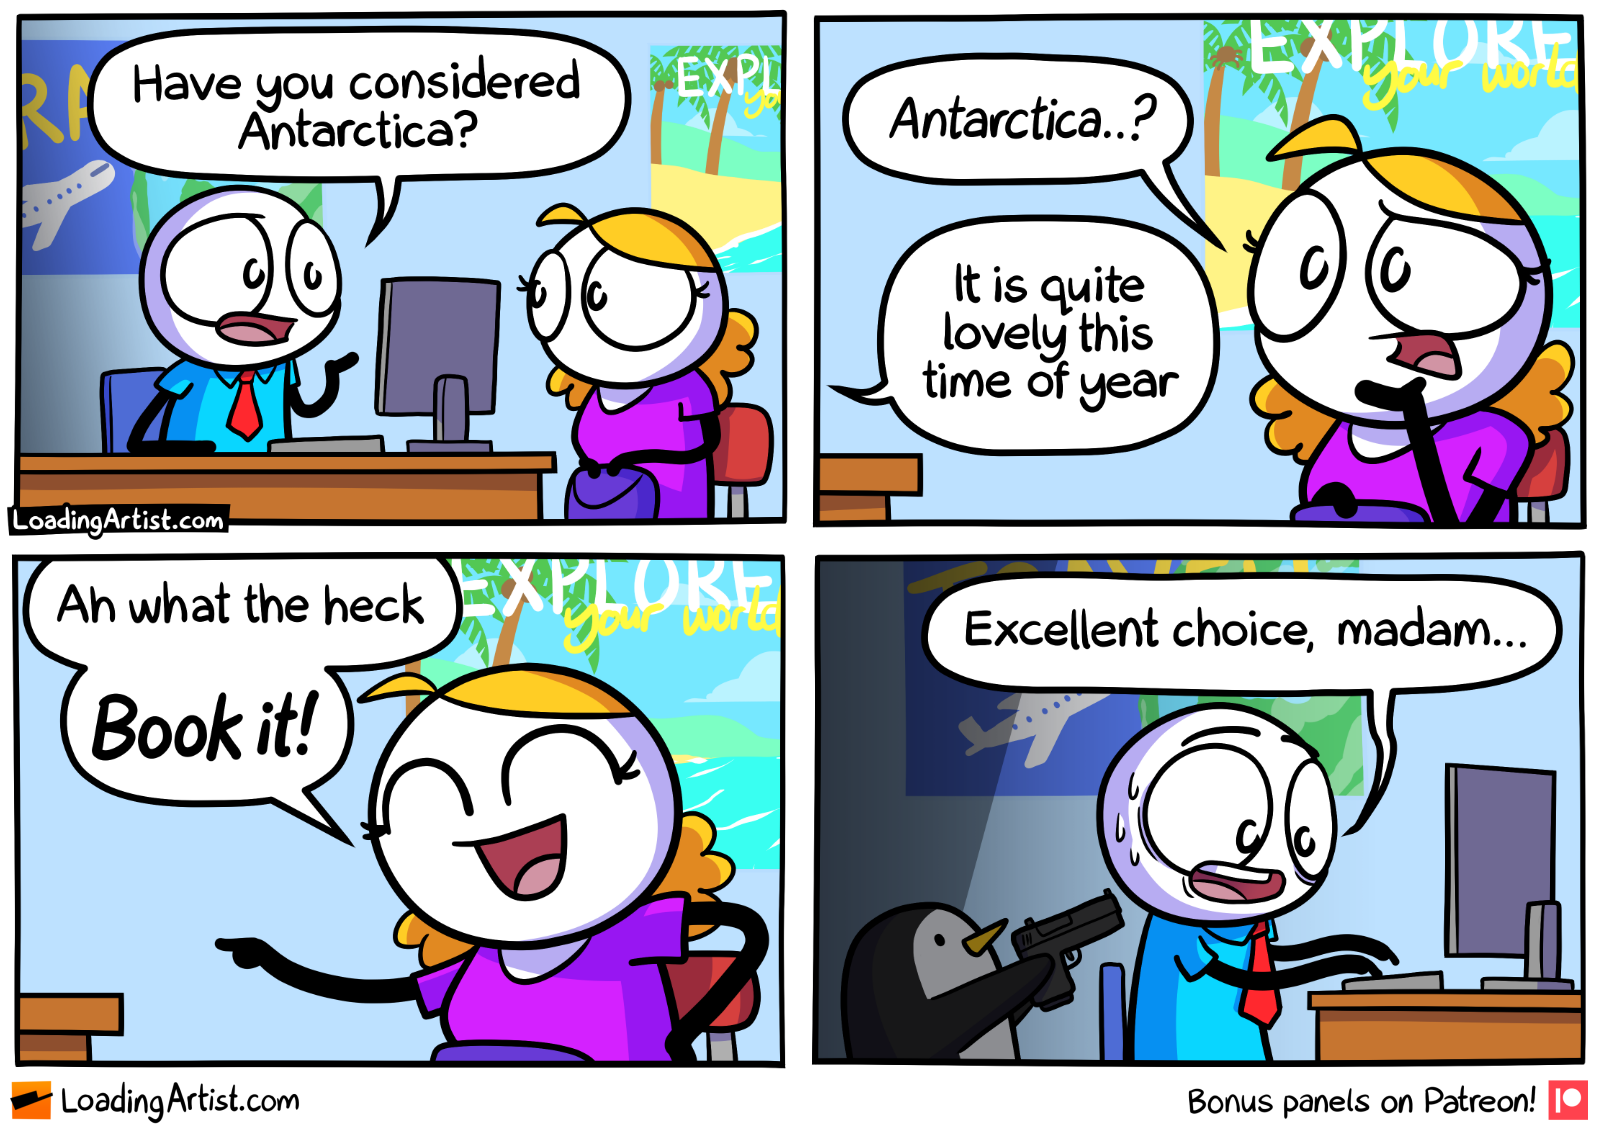 Have you considered Antarctica?